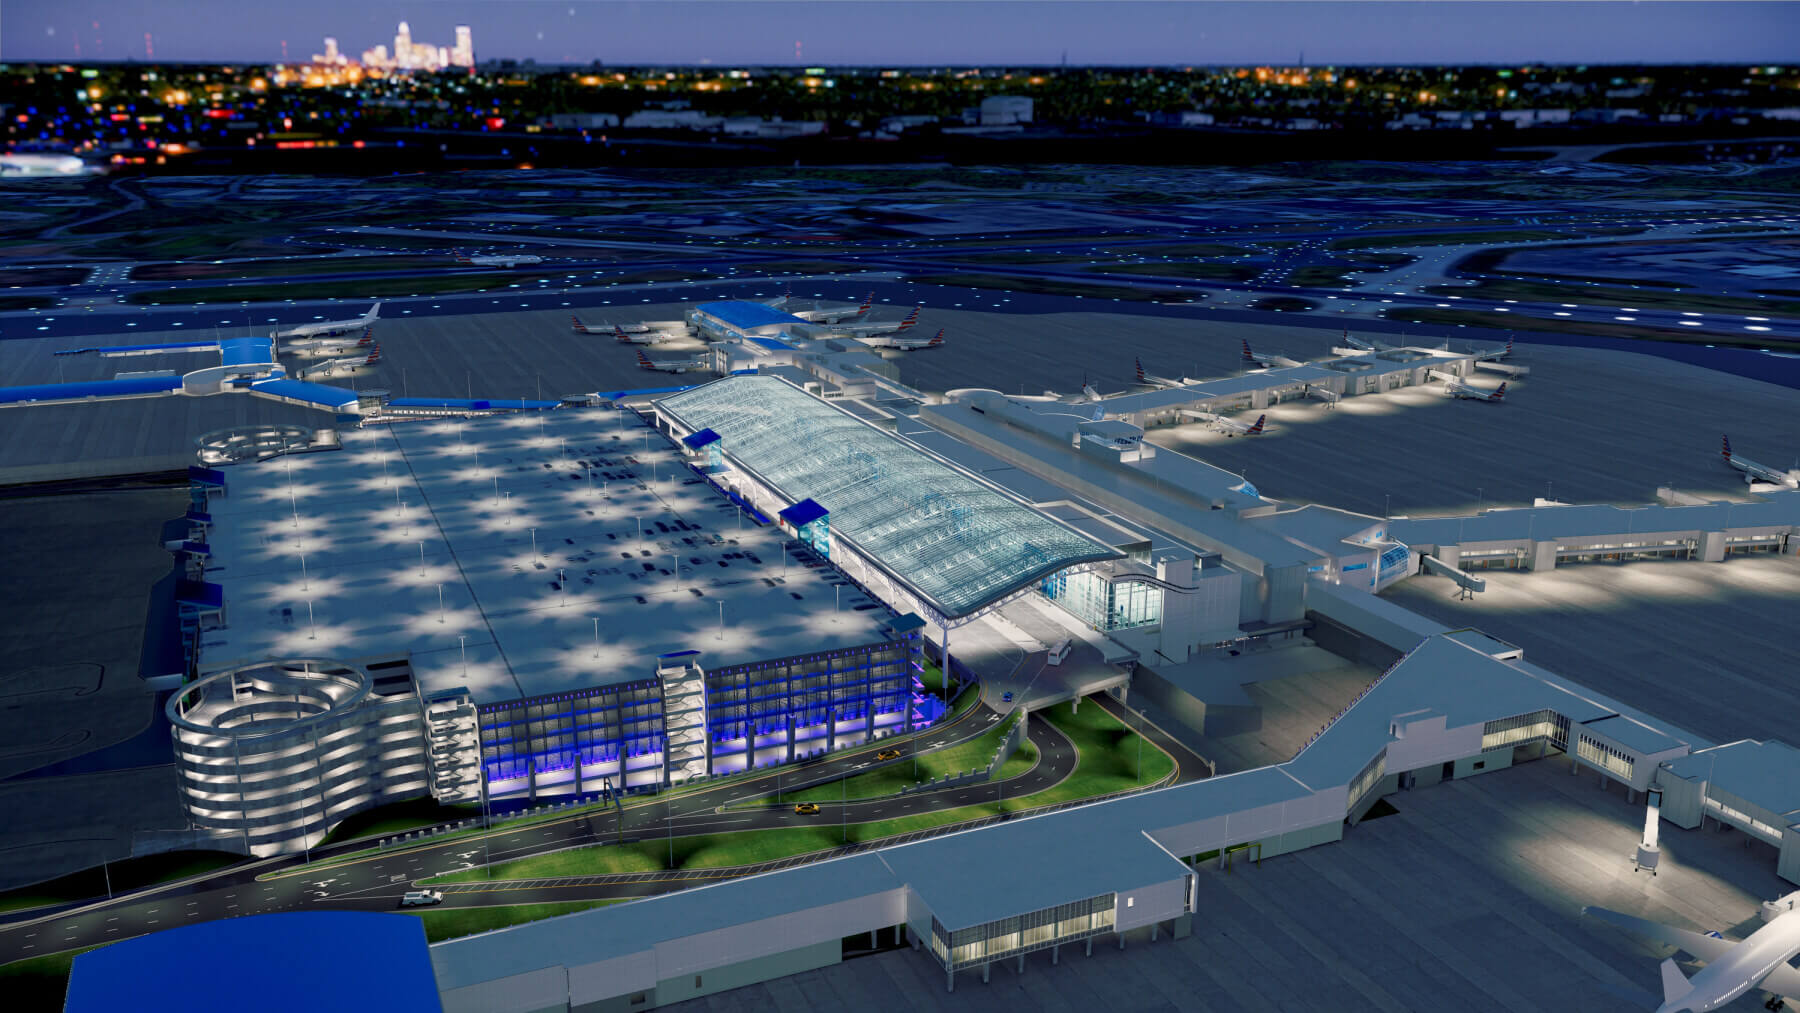 rendering of the aerial view at night of the expansion at Charlotte Douglas International Airport